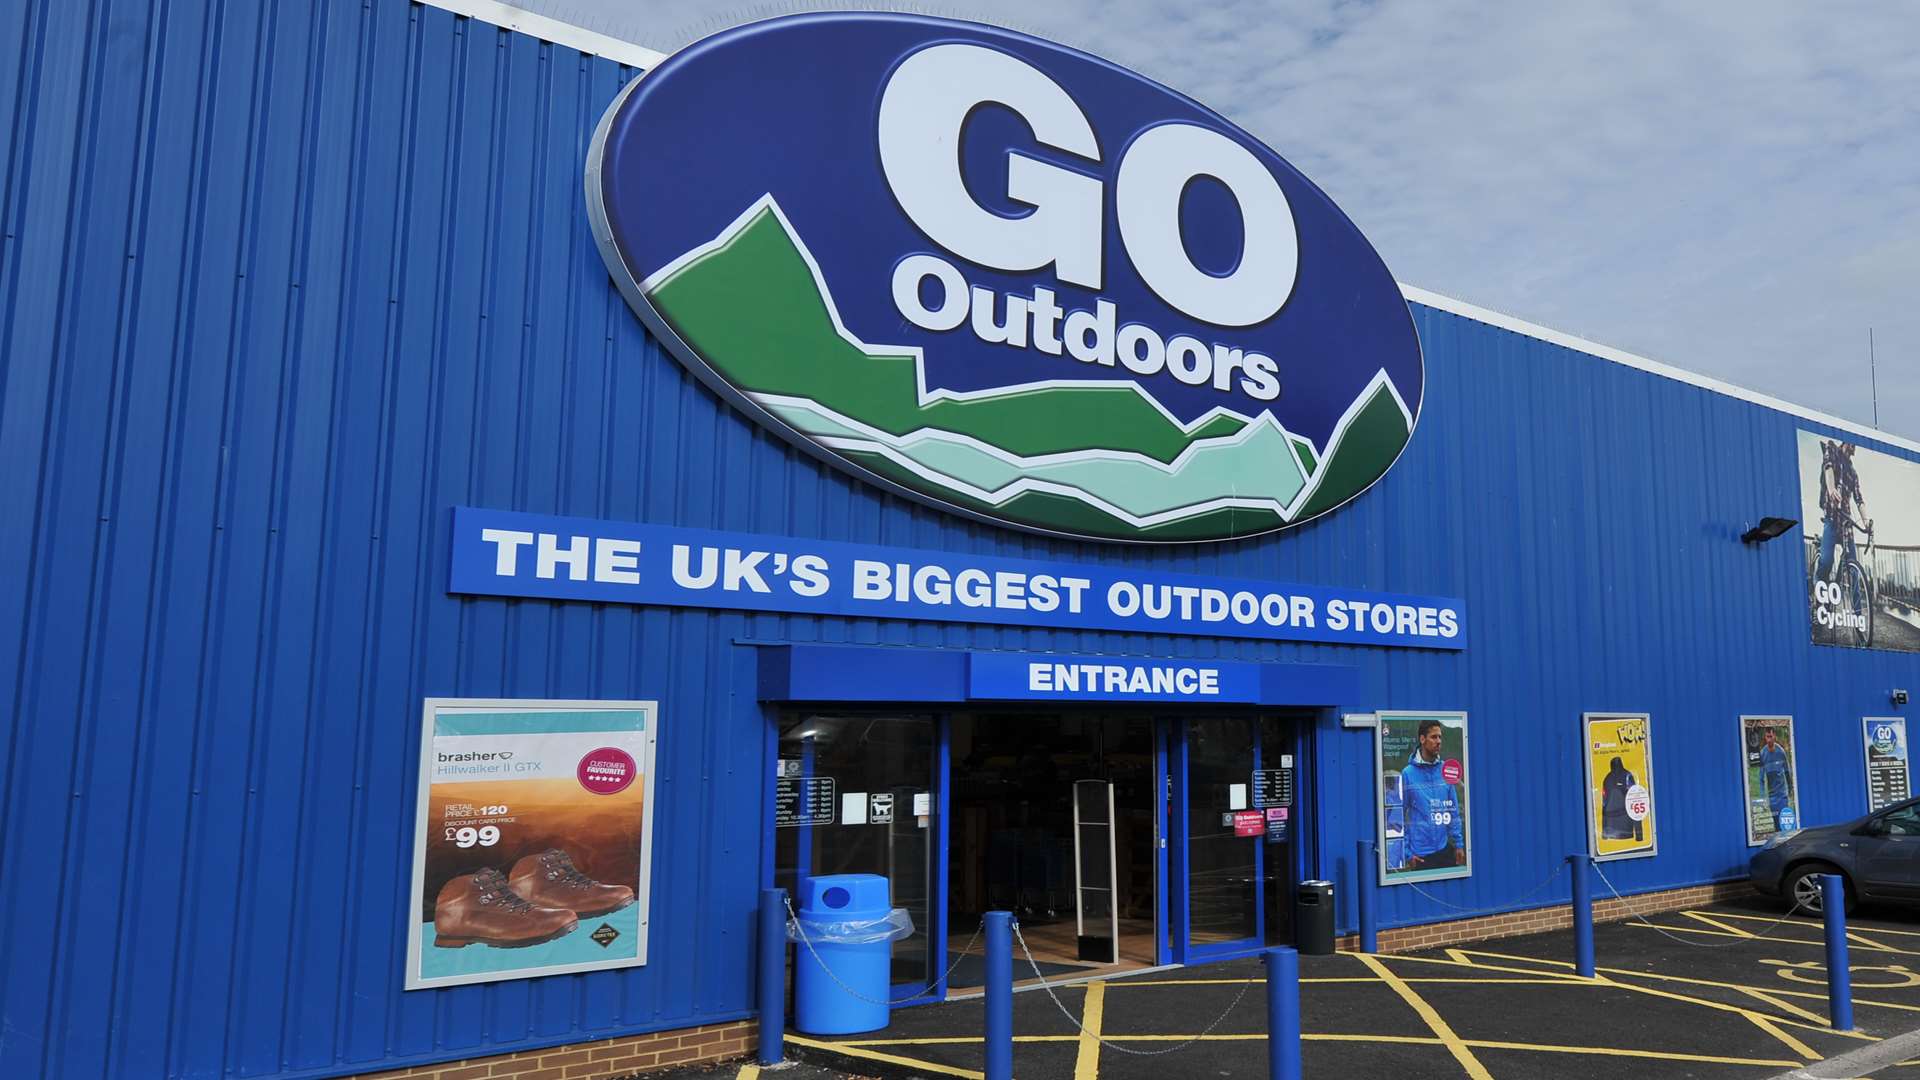 Go Outdoors branch in Canterbury